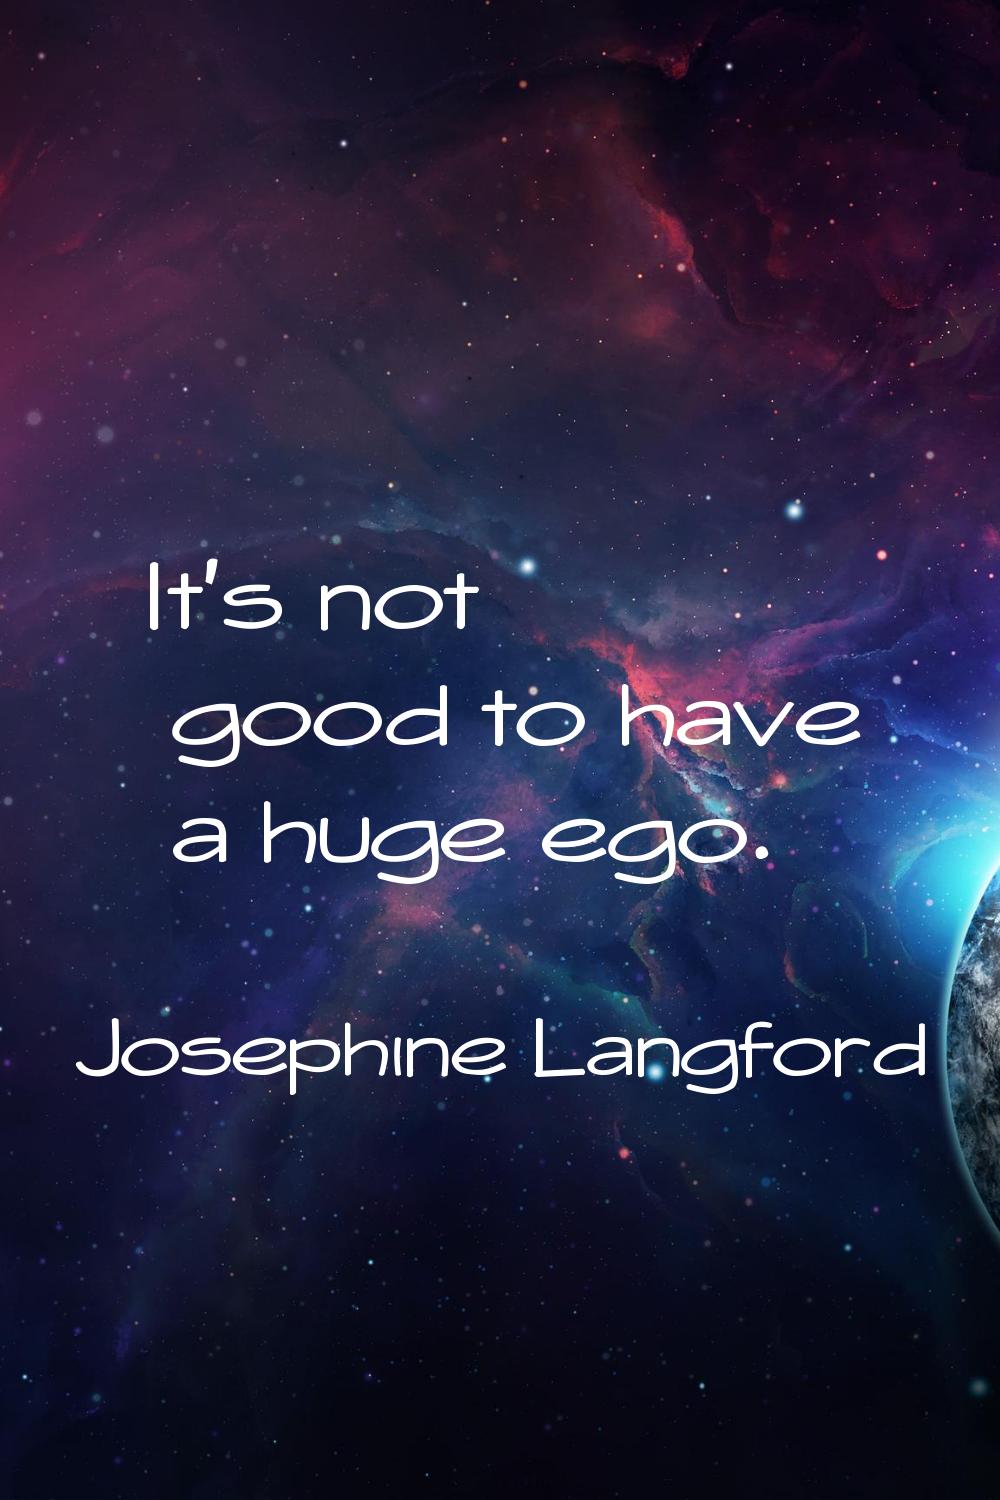 It's not good to have a huge ego.